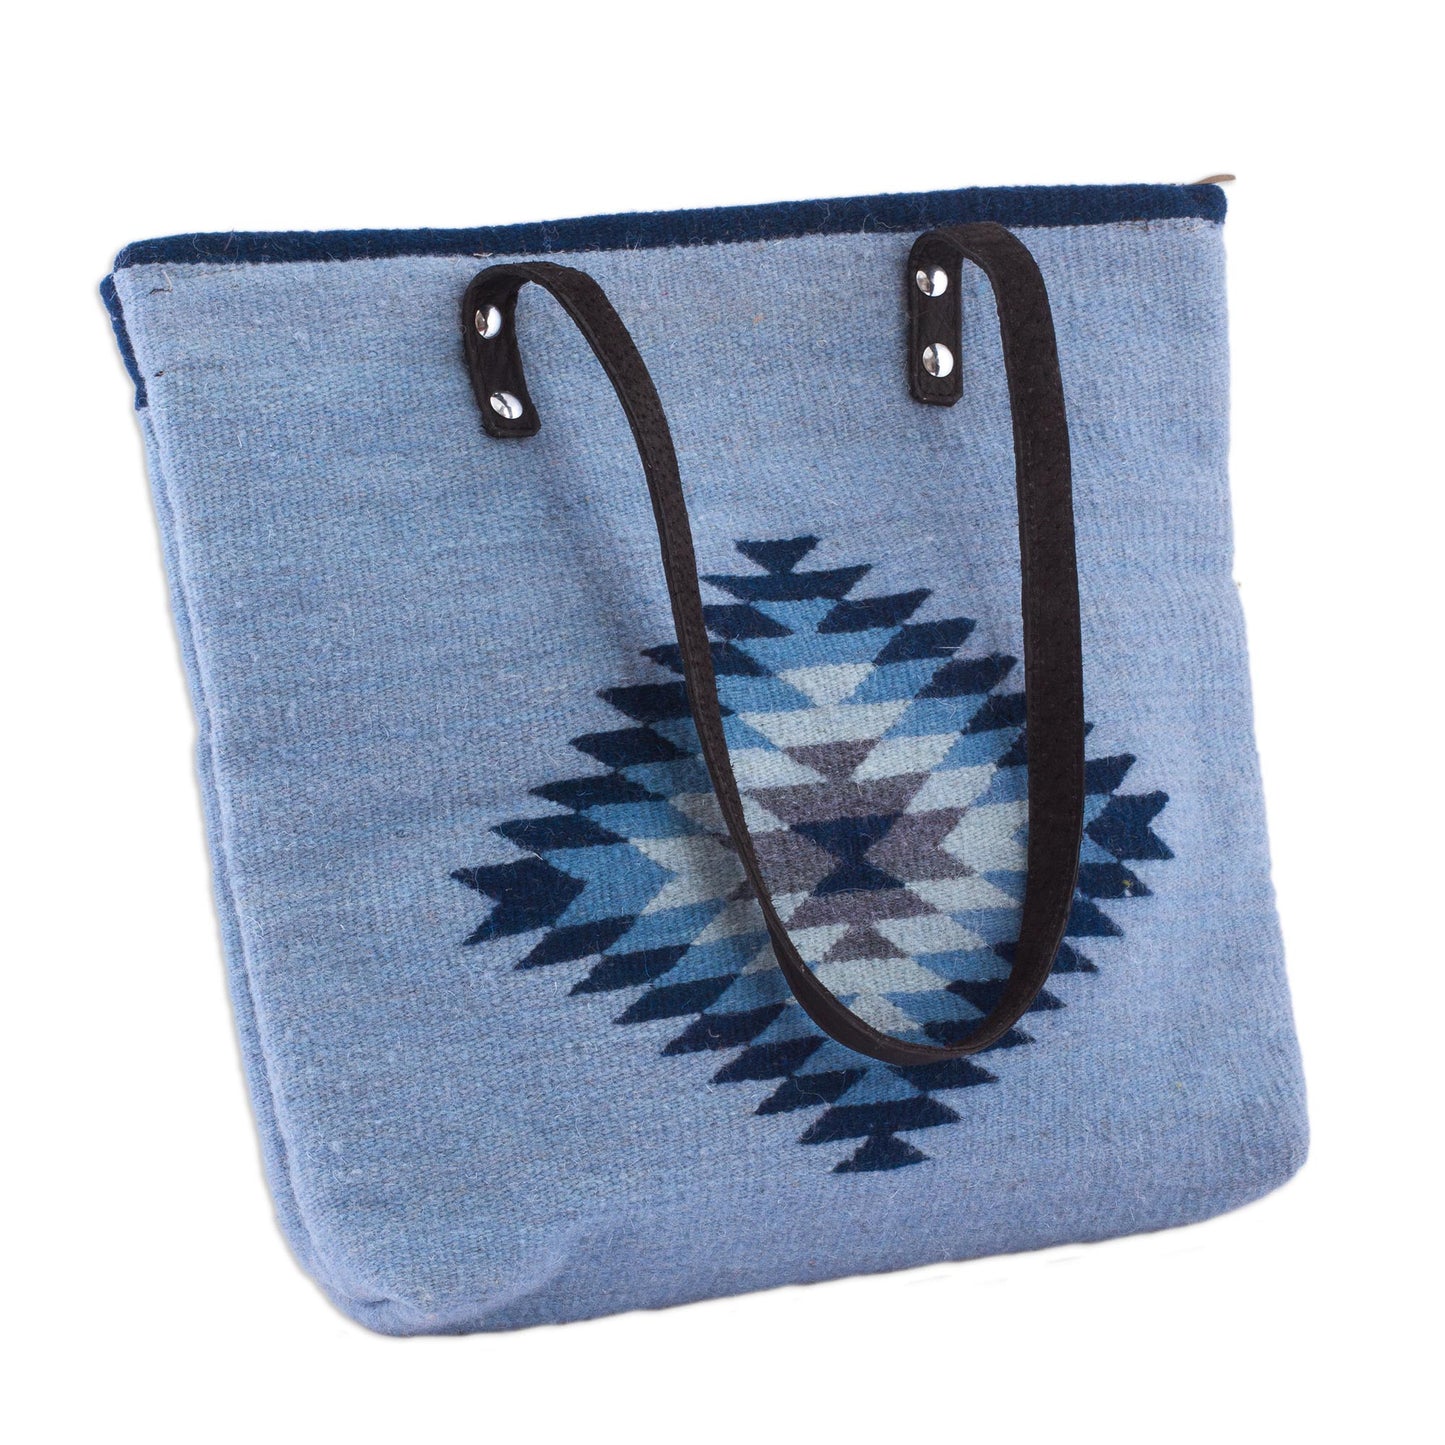 'Mexican Sky' Blue Wool and Leather Accent Tote Handbag